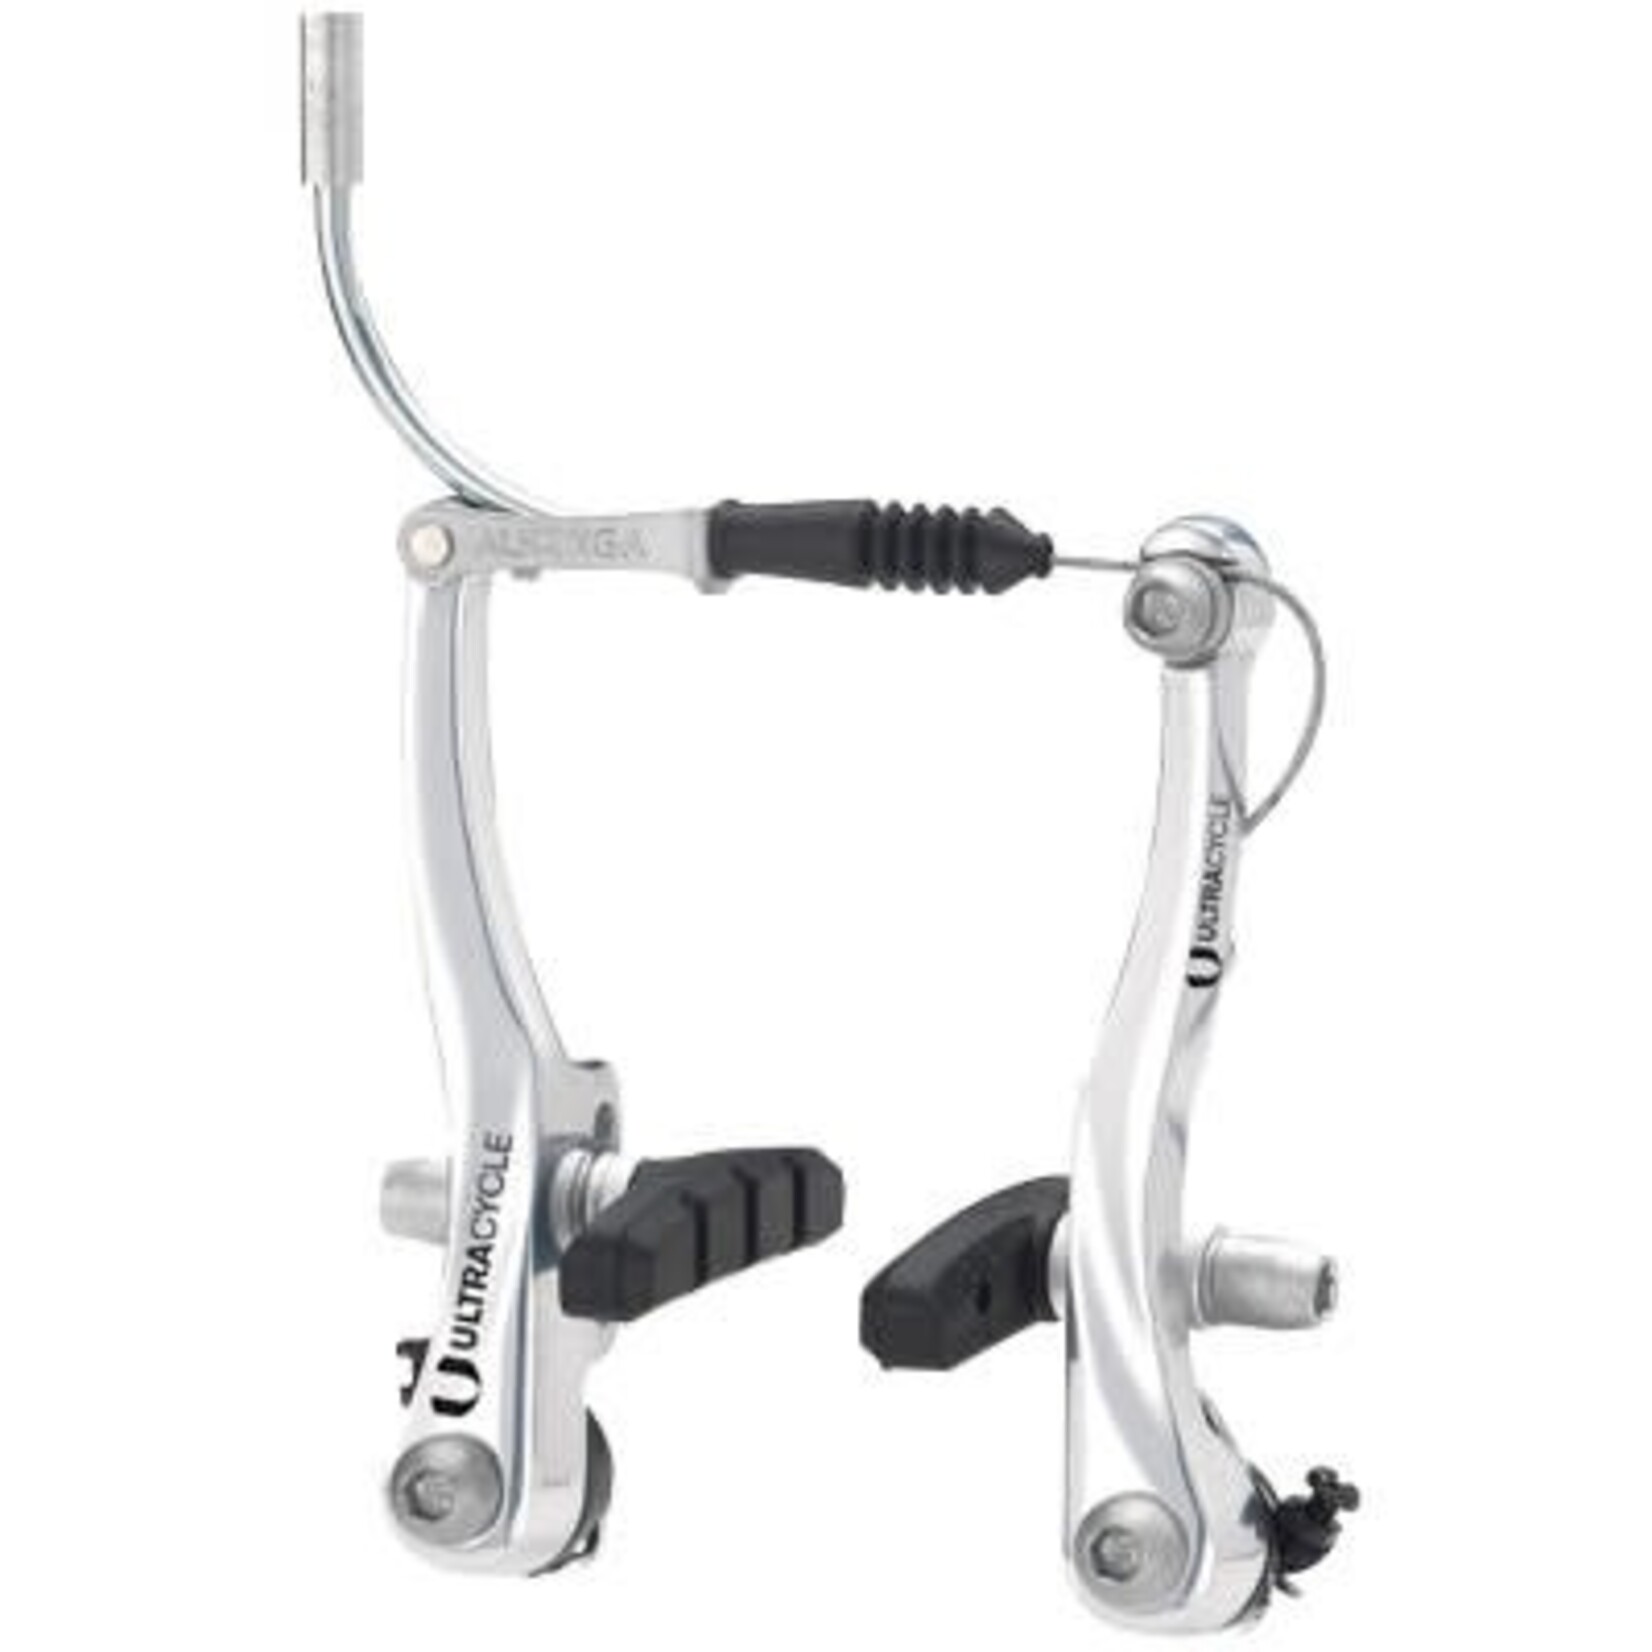 ULTRACYCLE KHS UC V-BRAKES FRONT AND REAR SIL